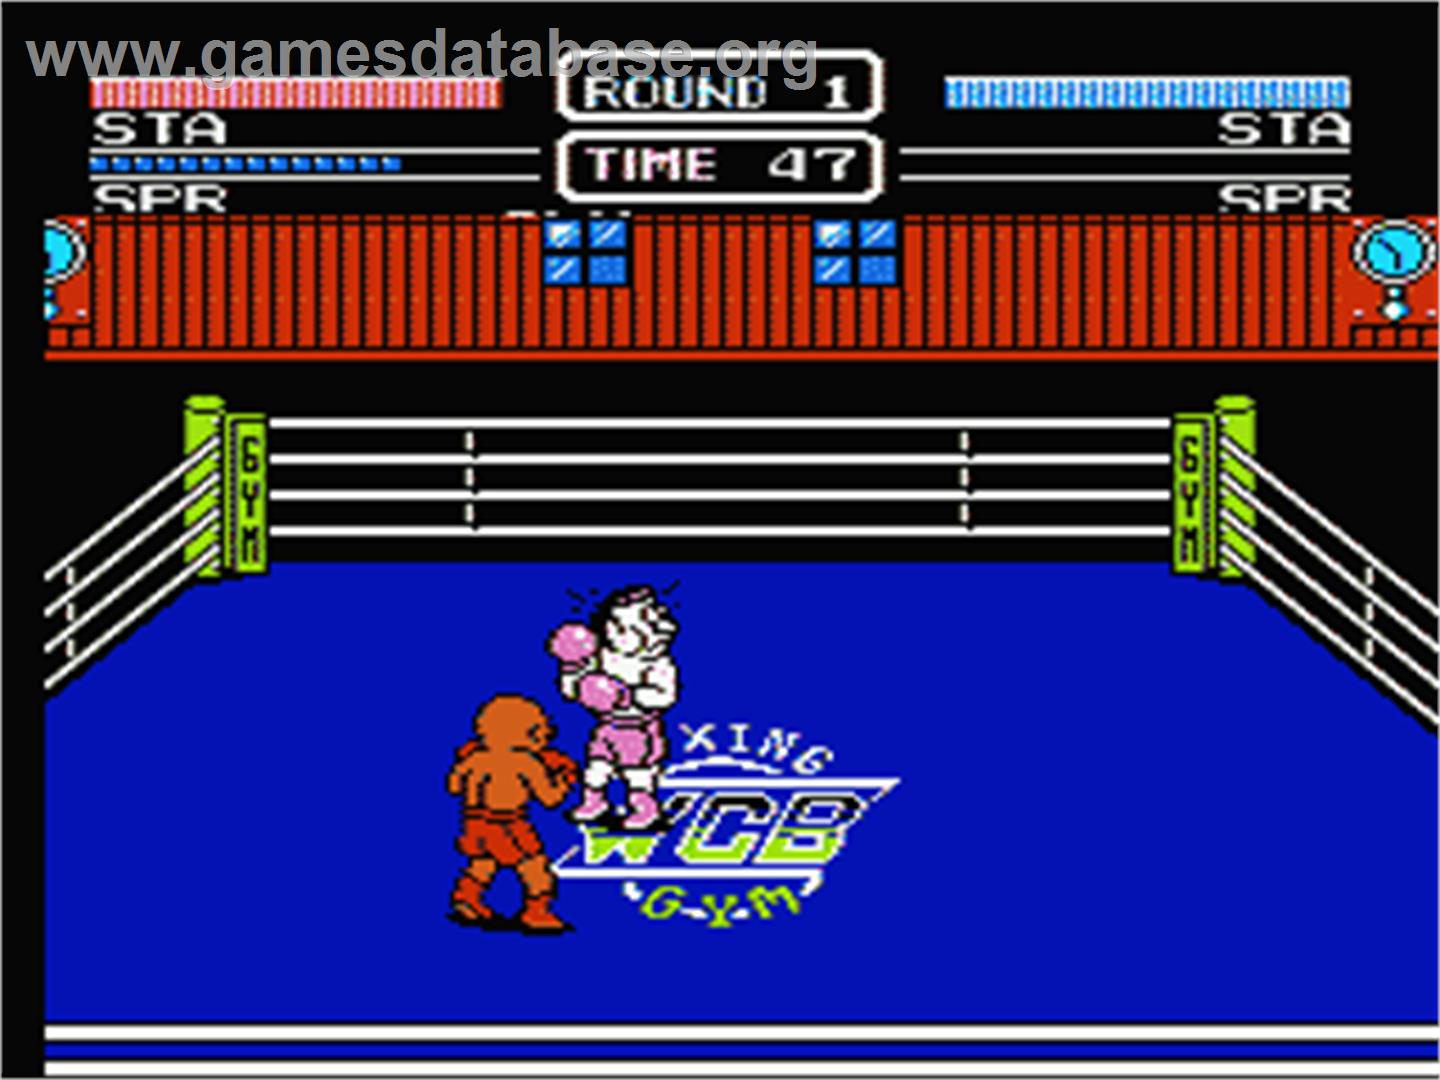 World Champ:  Super Boxing Great Fight - Nintendo NES - Artwork - In Game